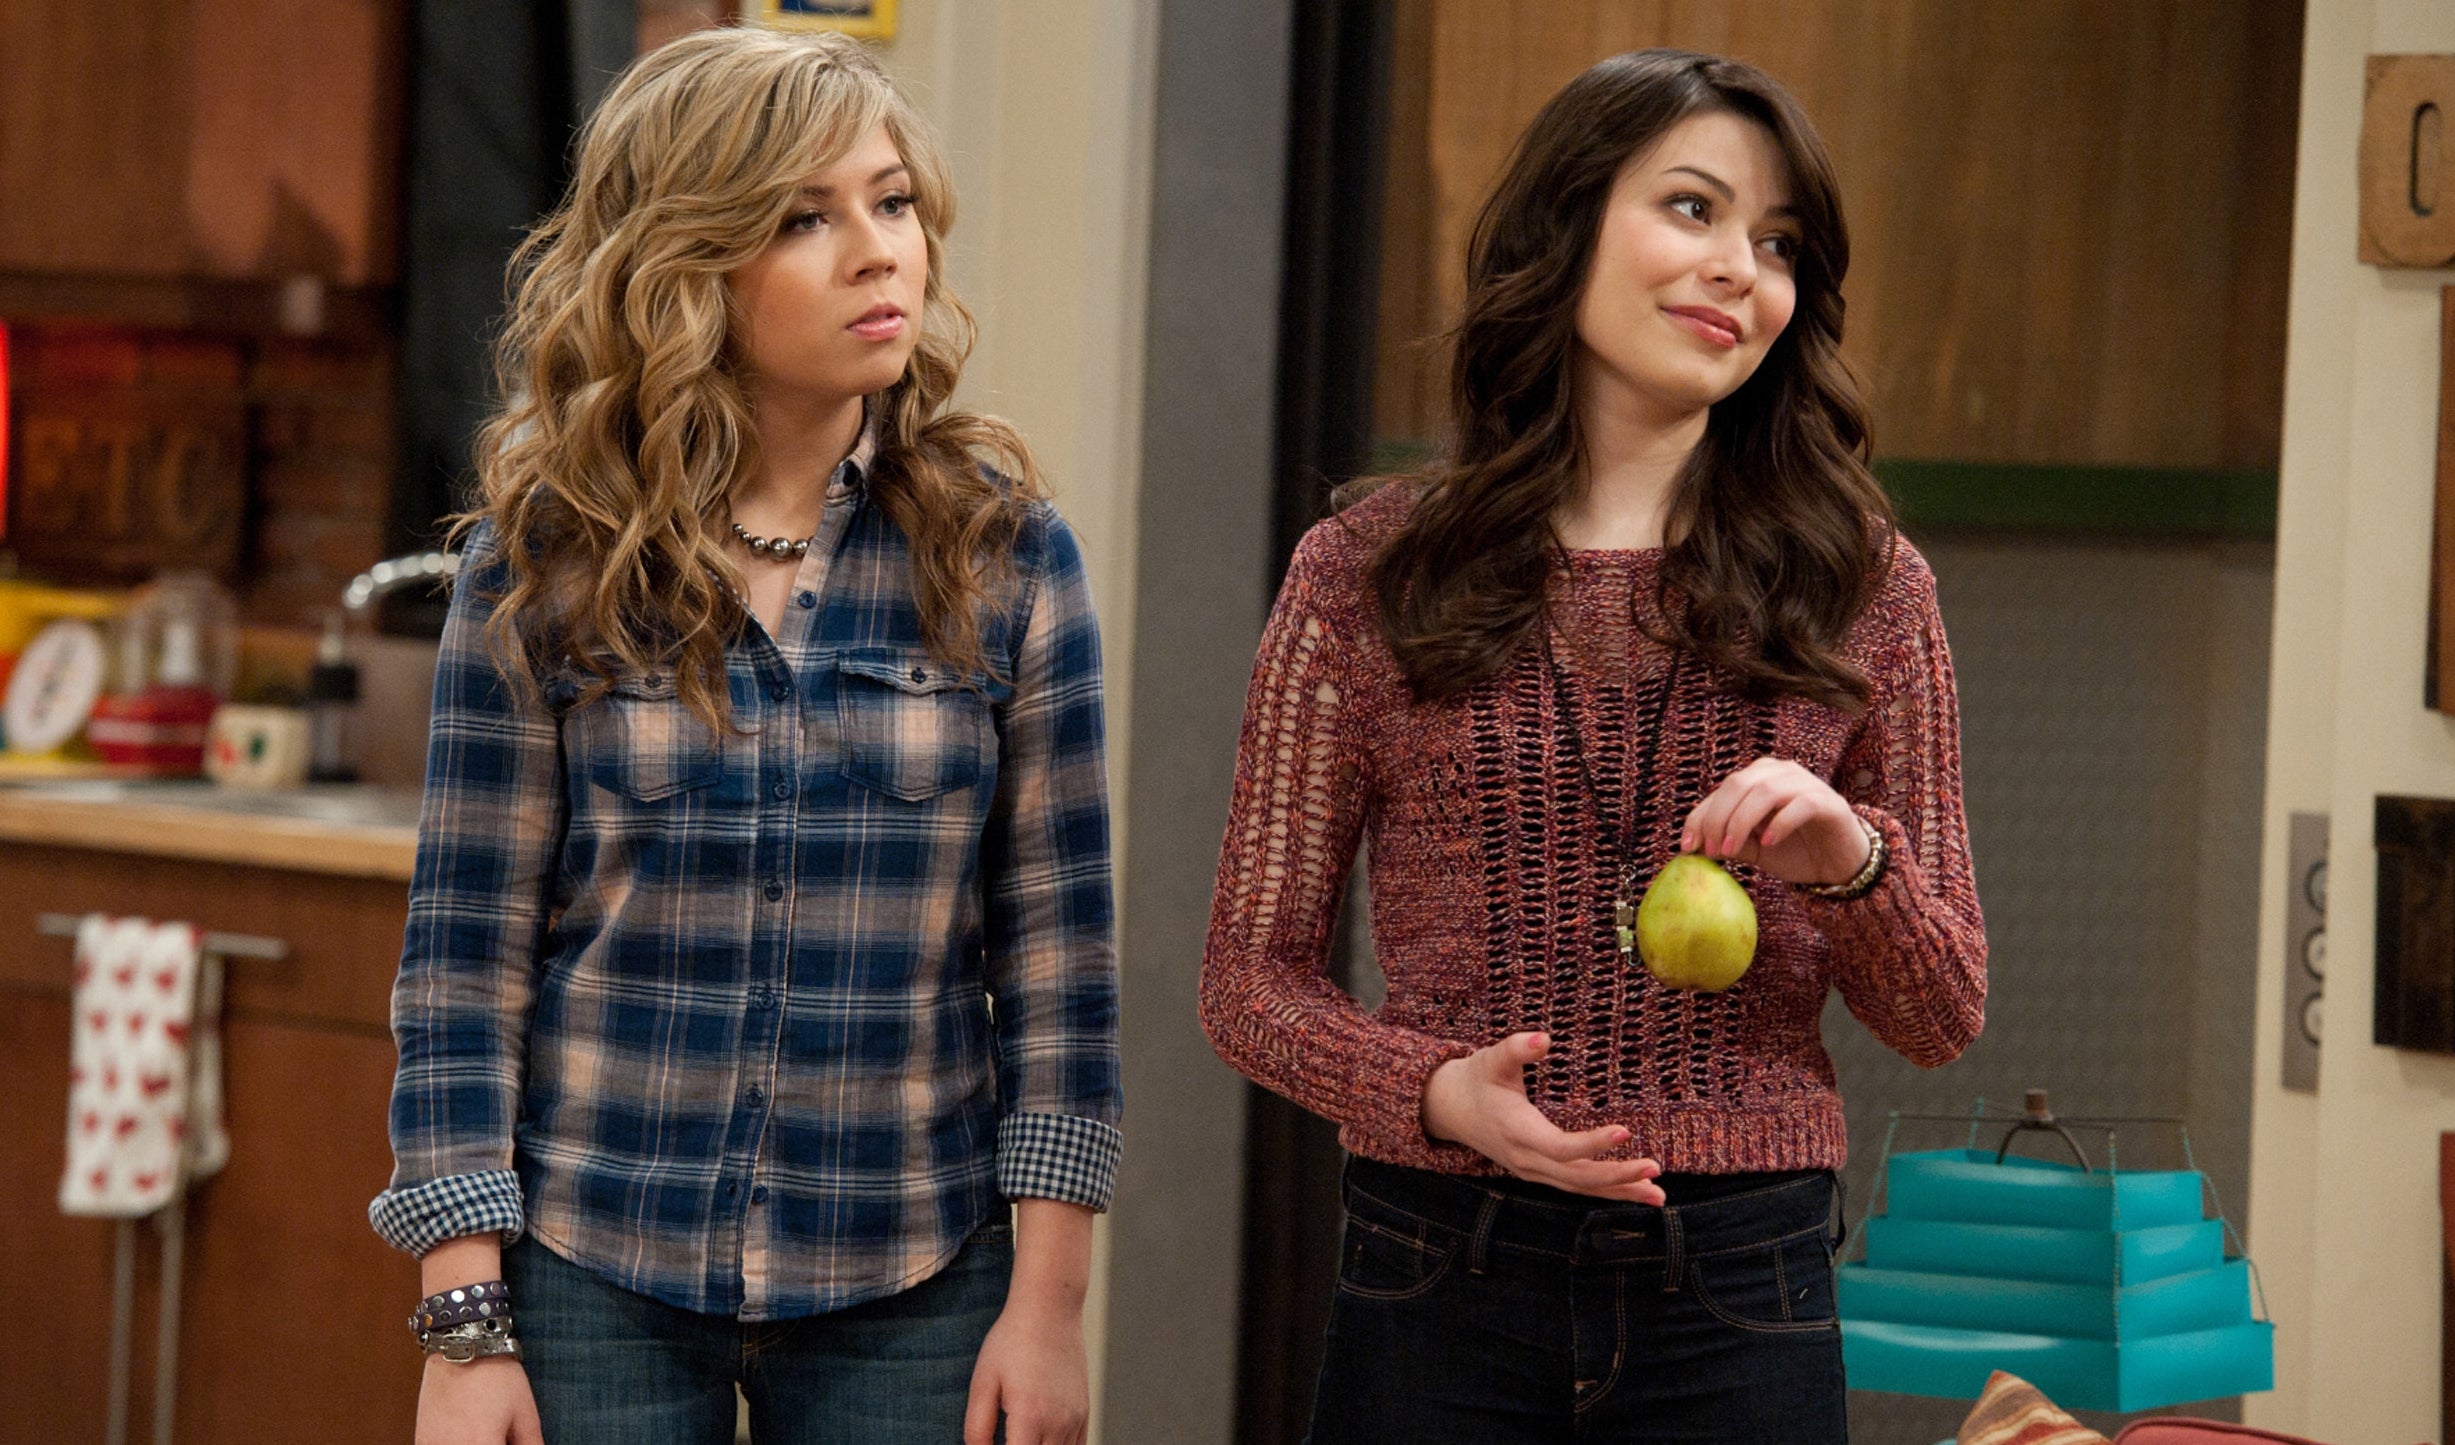 Miranda in icarly as carly with Jennette McCurdy as Sam